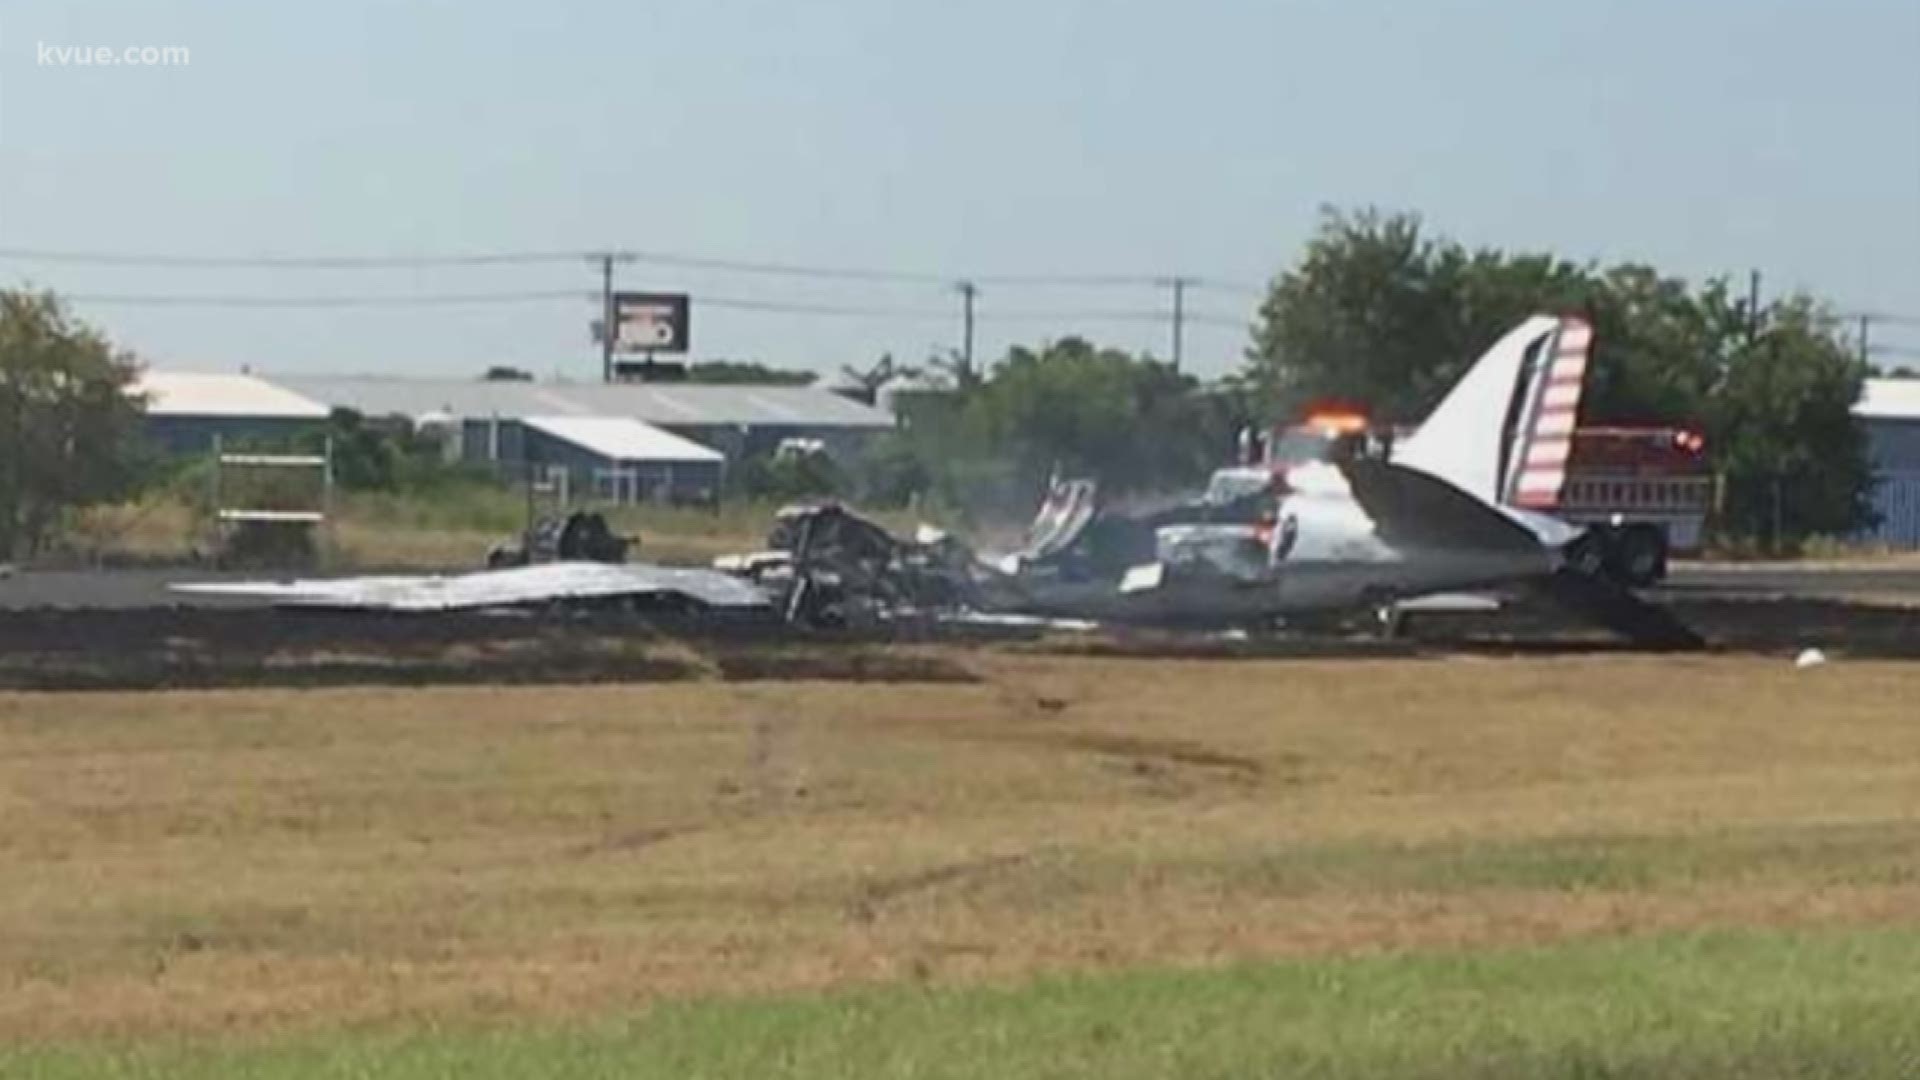 The pilot veered off the runway as the plane burst into flames.